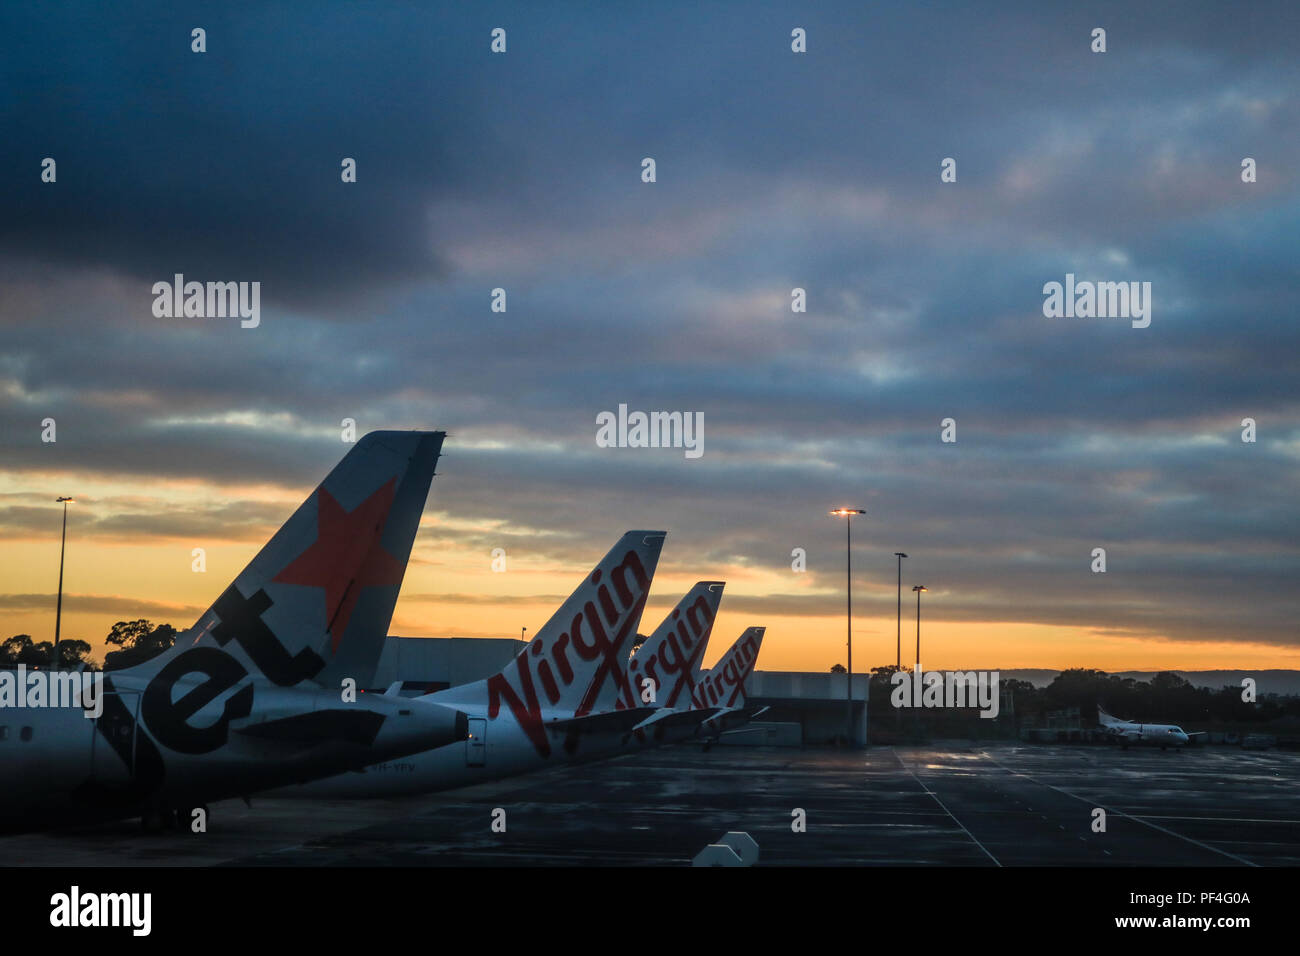 Adelaide, Australia. 19 August 2018.  Jet Star and Virgin airplane tail fins are silhouetted against a dramatic sky during colourful sunrise at Adelaide International Airport Australia Stock Photo